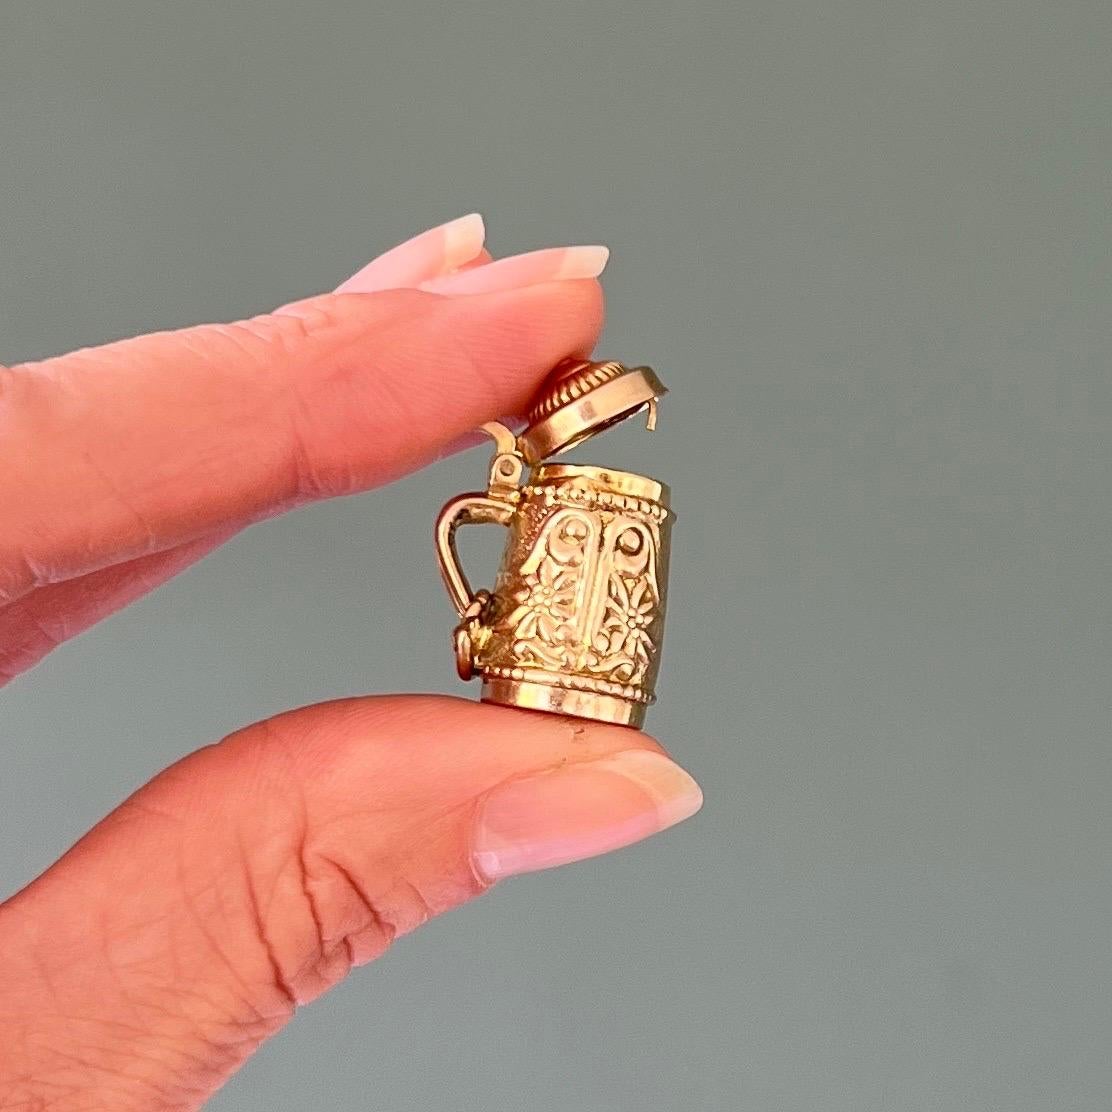 This is a vintage 9 karat yellow gold beer stein mug charm pendant. This vintage beer stein has some great details with a beautiful floral decor of edelweiss throughout the beer stein. The lid of the mug can be openend and closed.

Collect your own